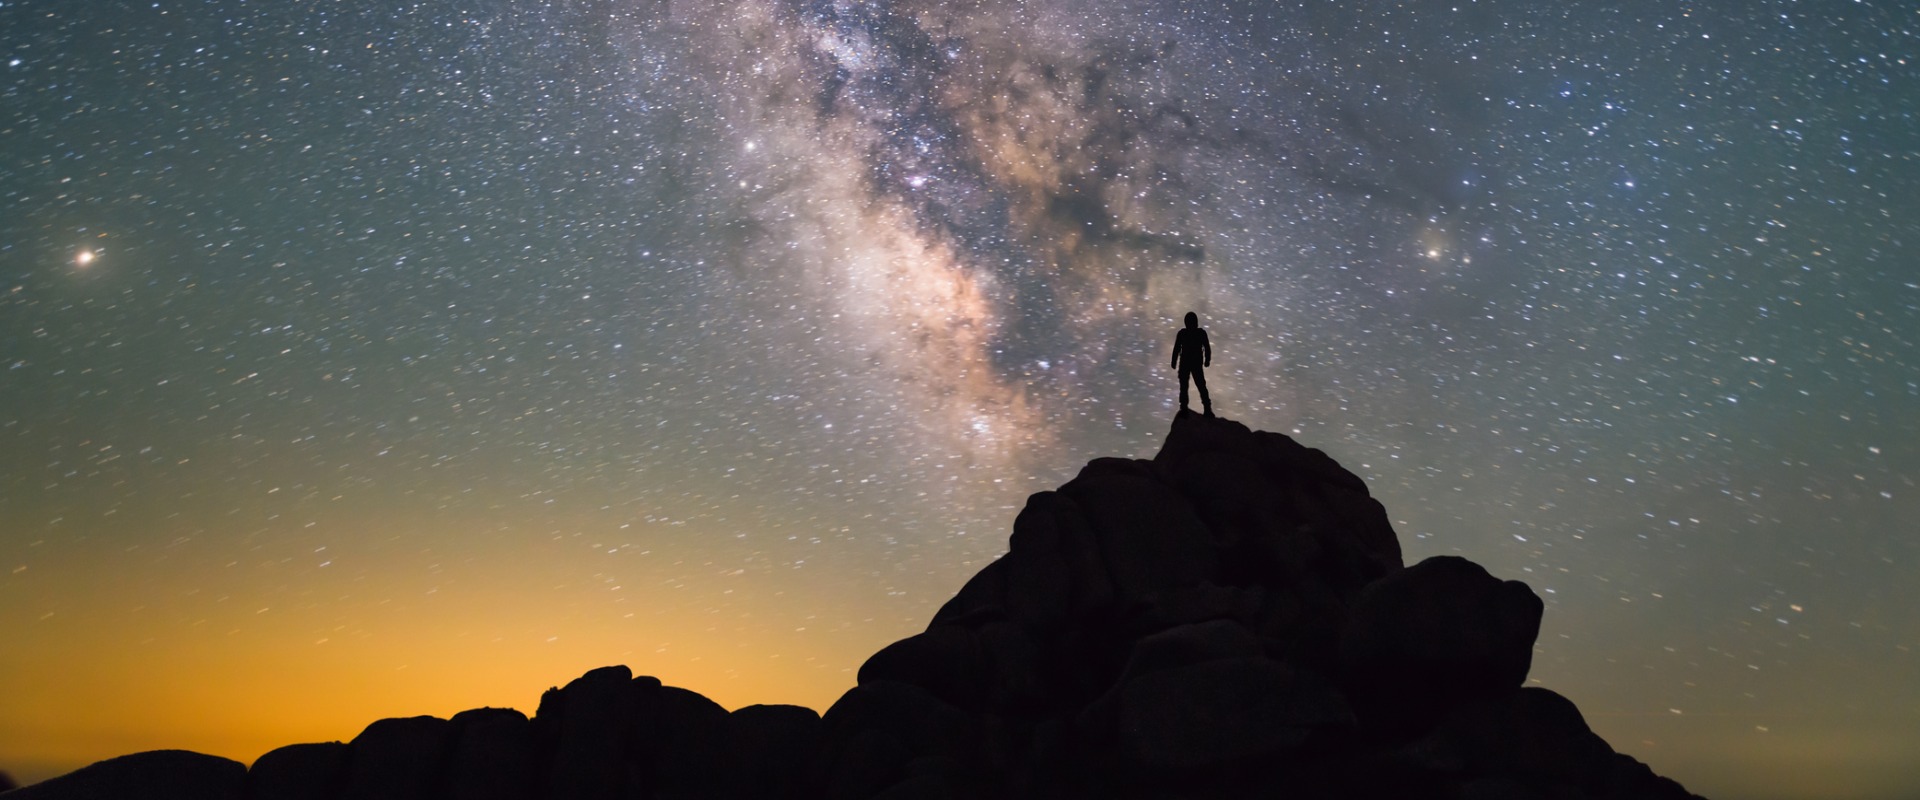 Silhouette of man on rocks against a brilliant night sky